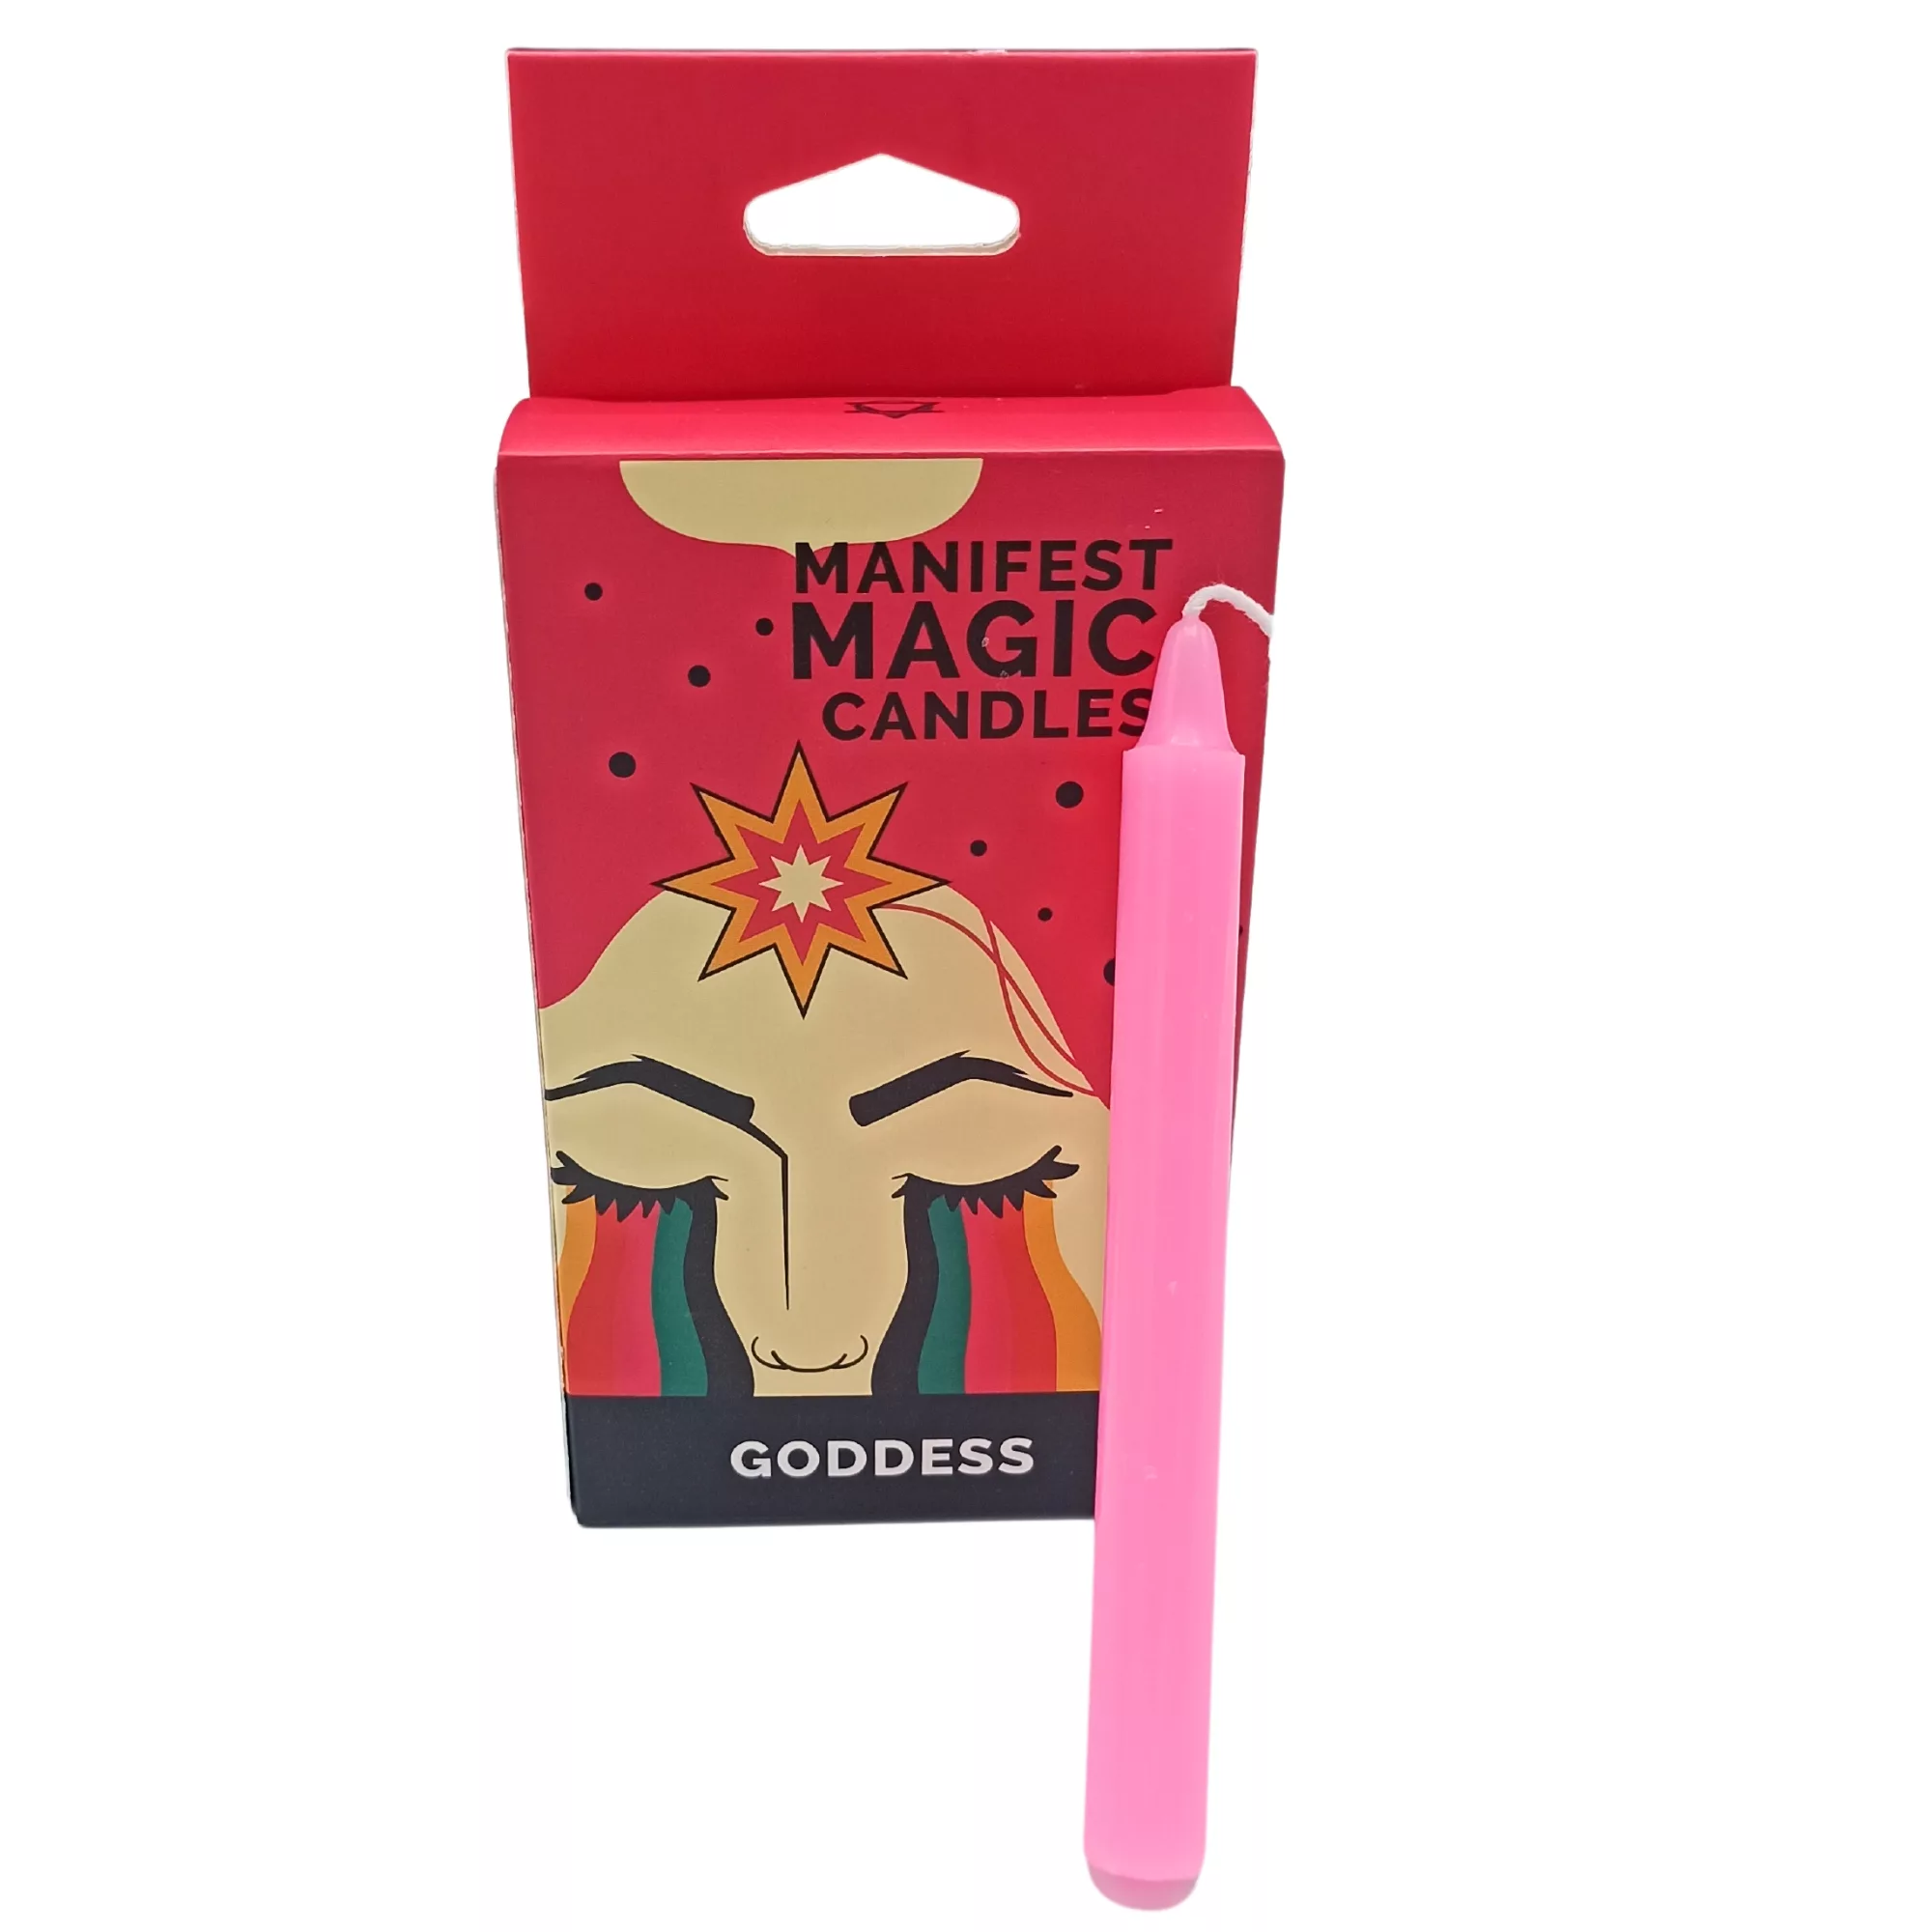 Manifest Magic Candles (pack of 12) – Pink